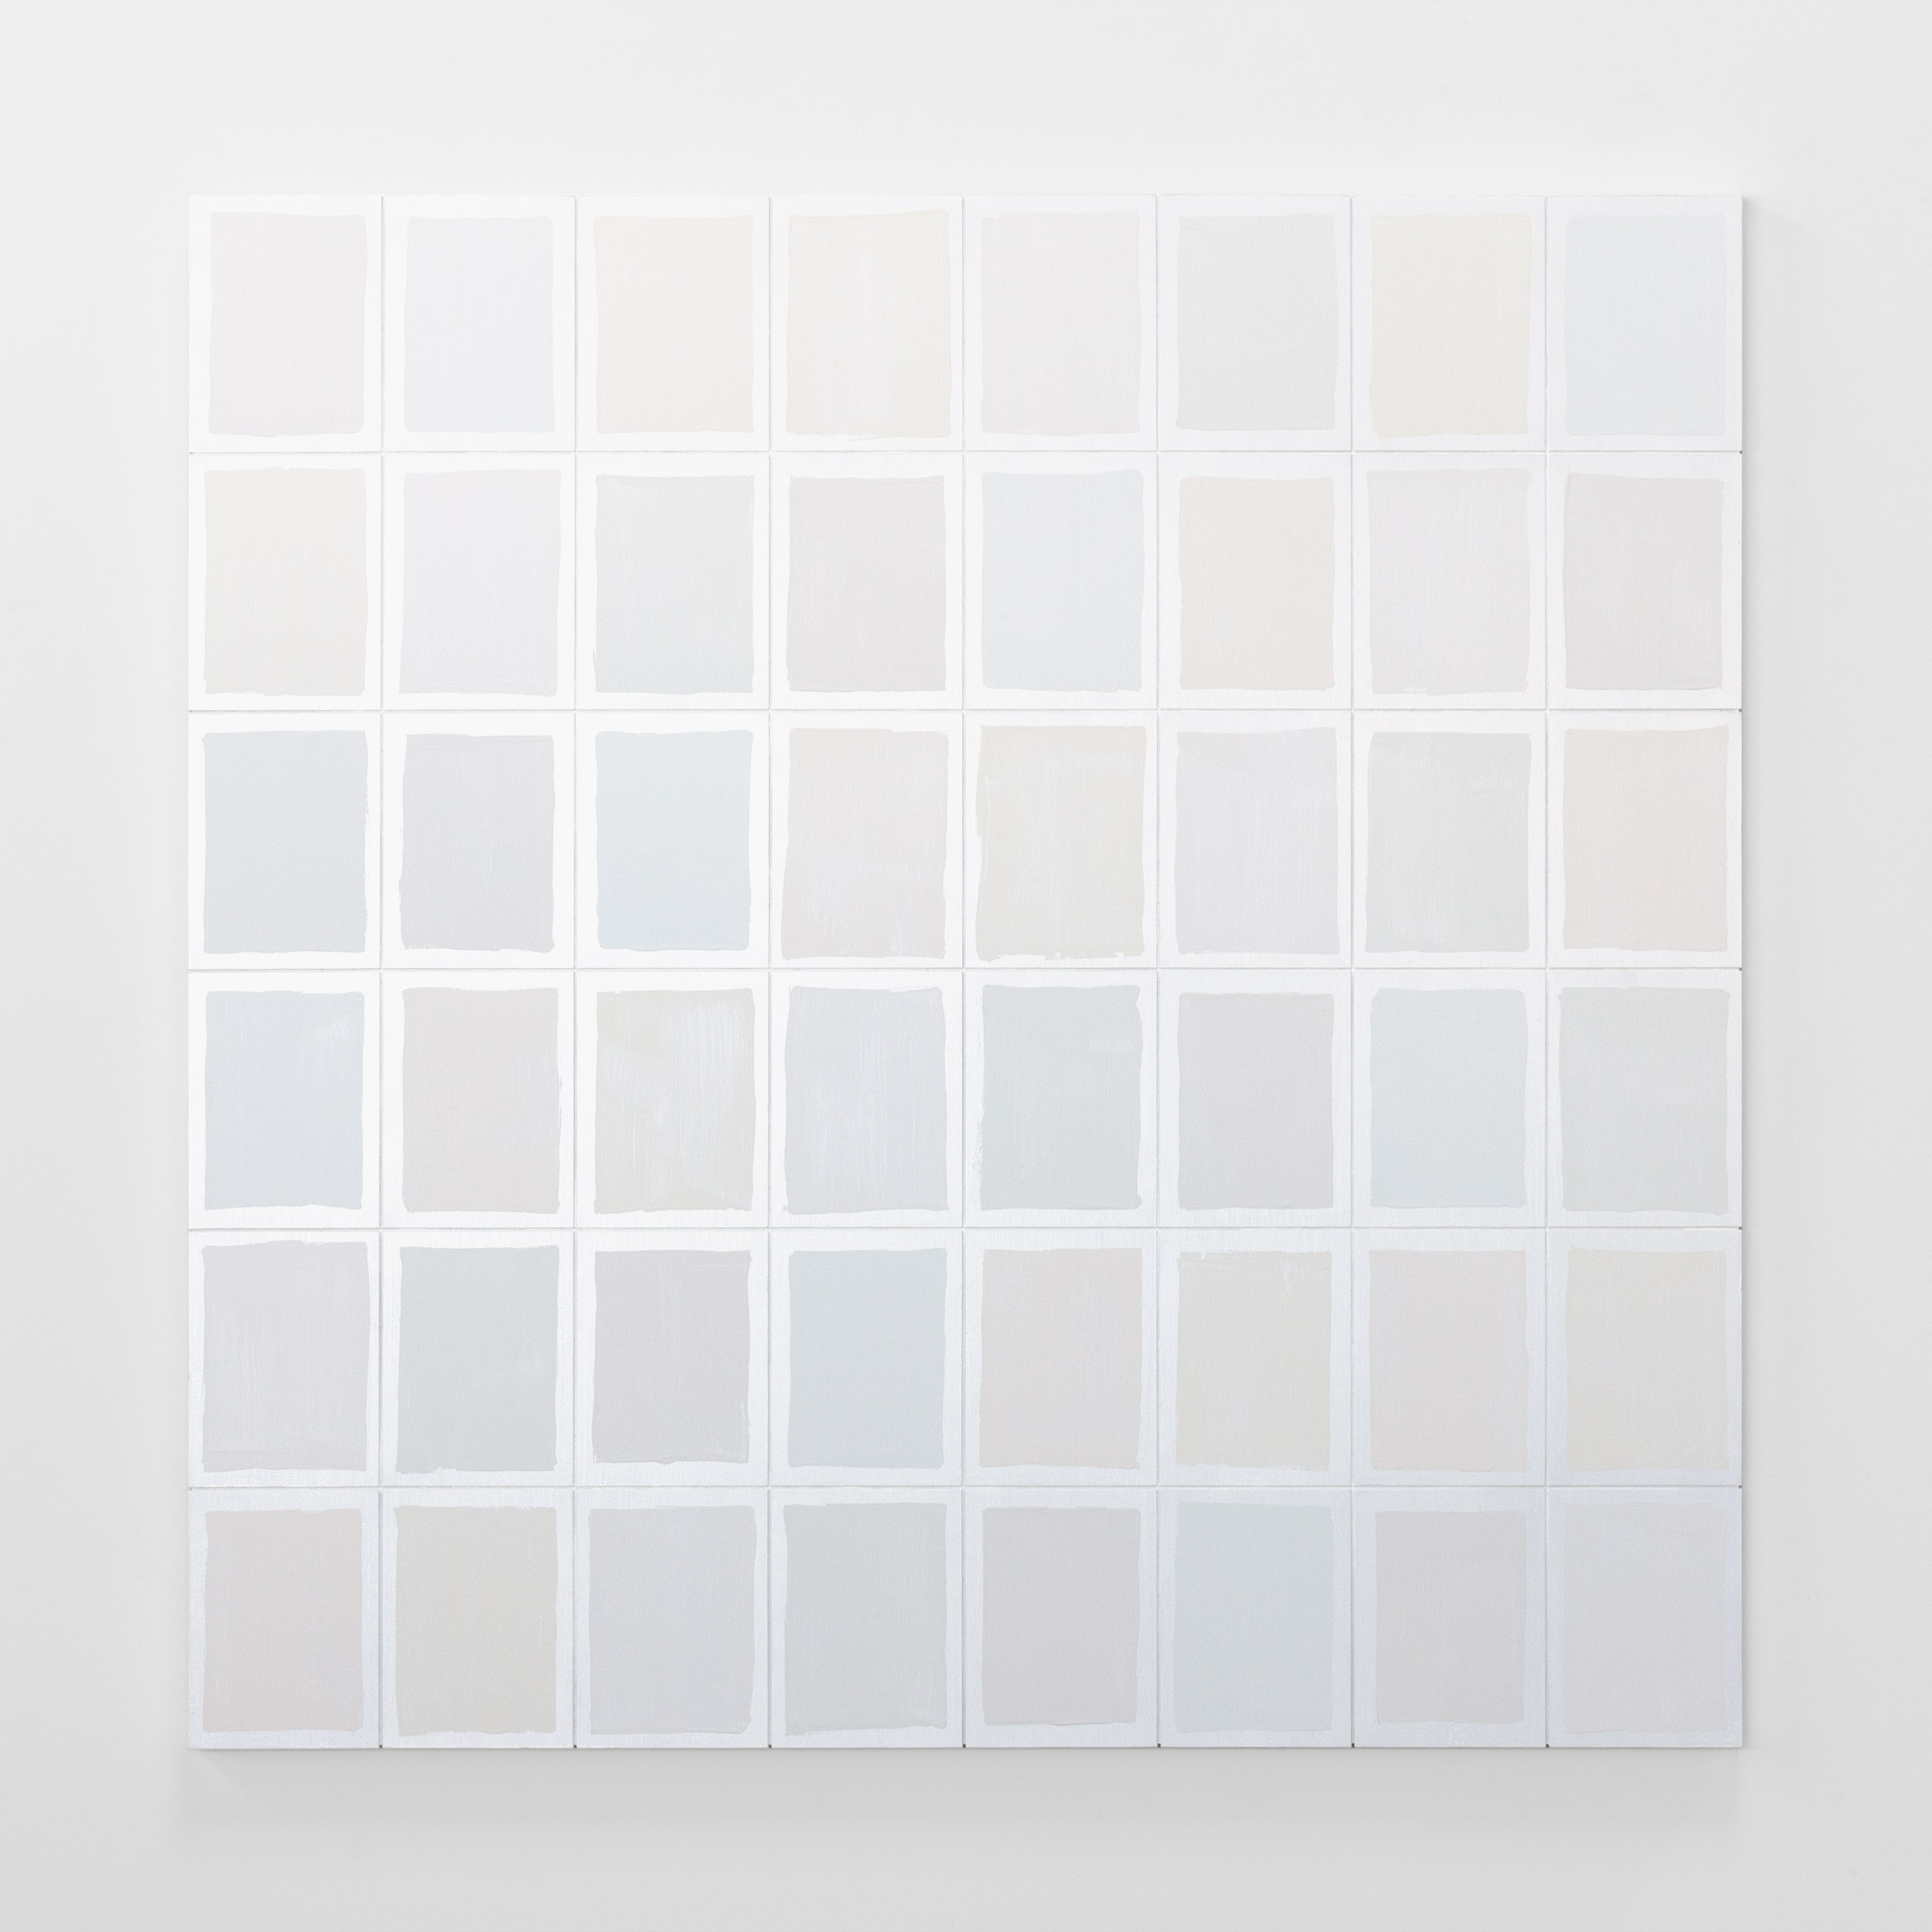 PAINTING (GRIDS)